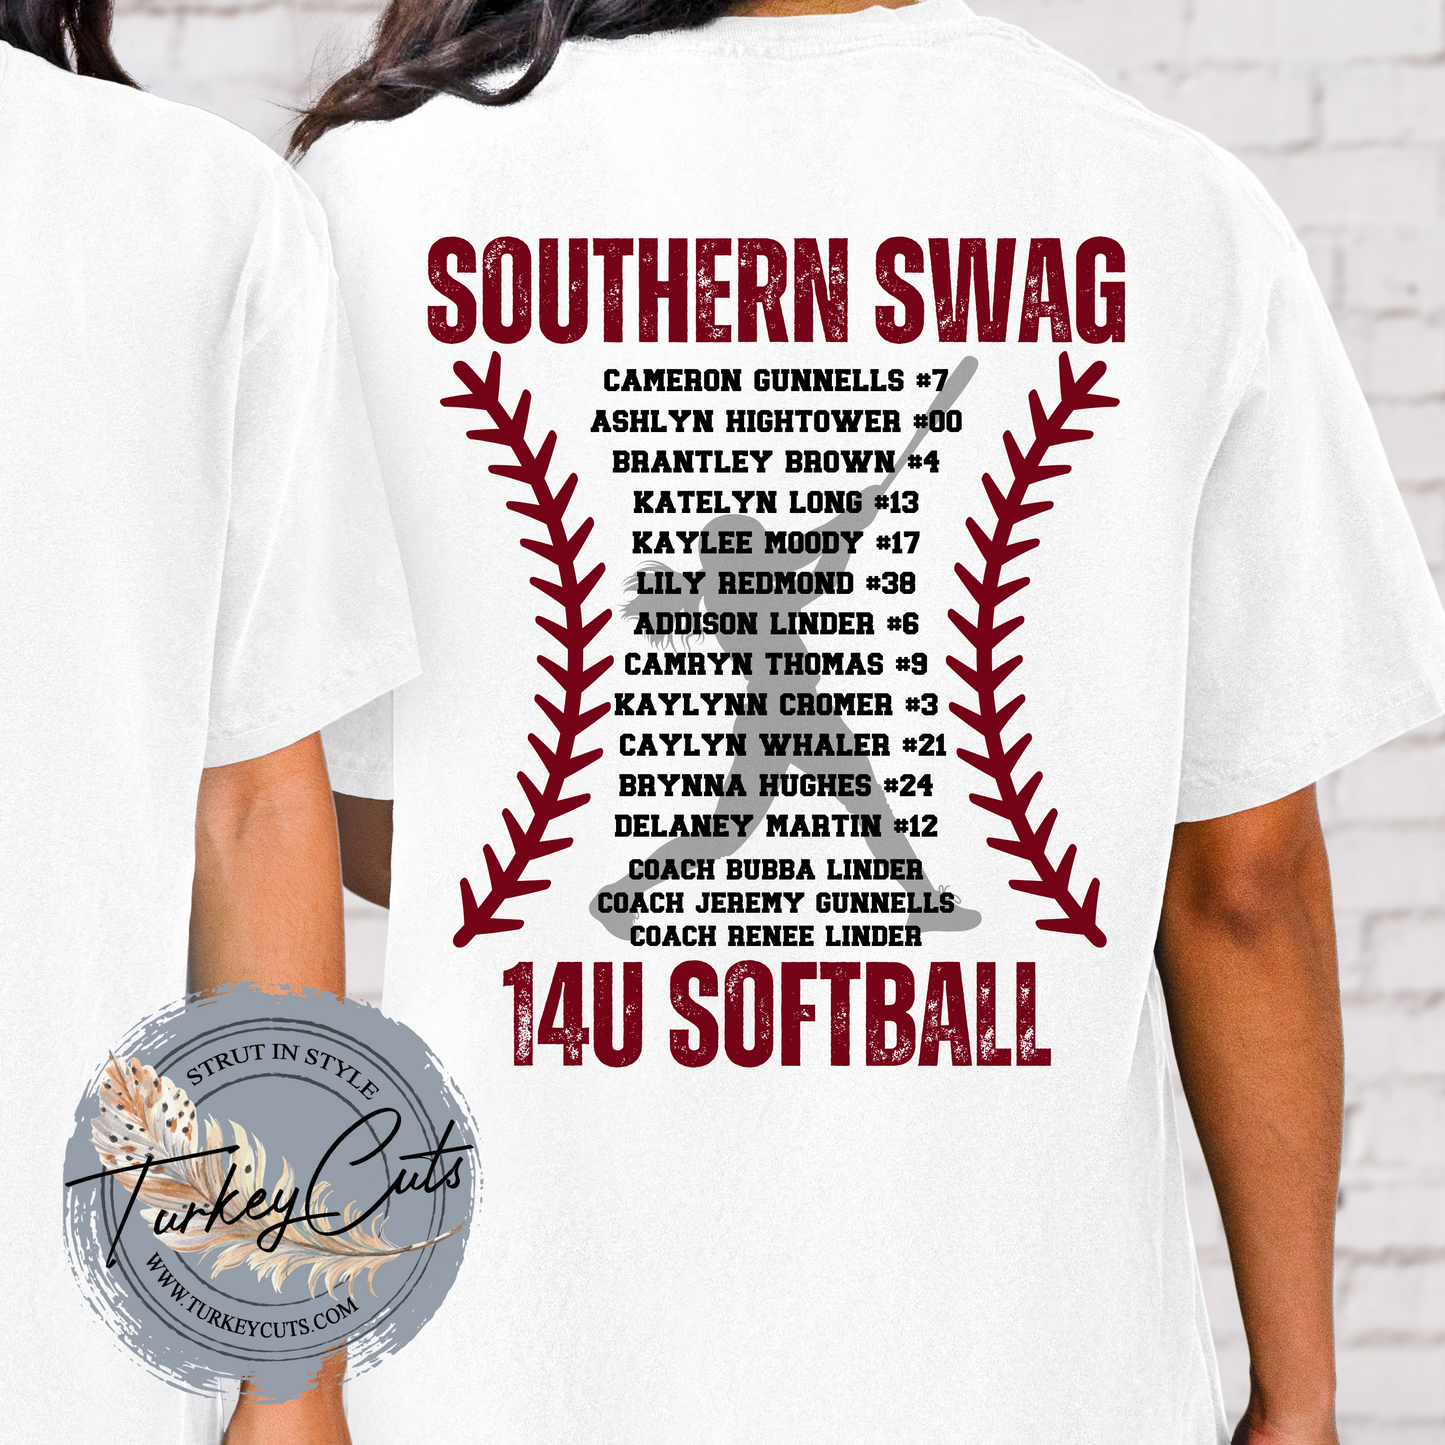 Southern Swag Team Roster Tee (available for 10U, 12U, & 14U)